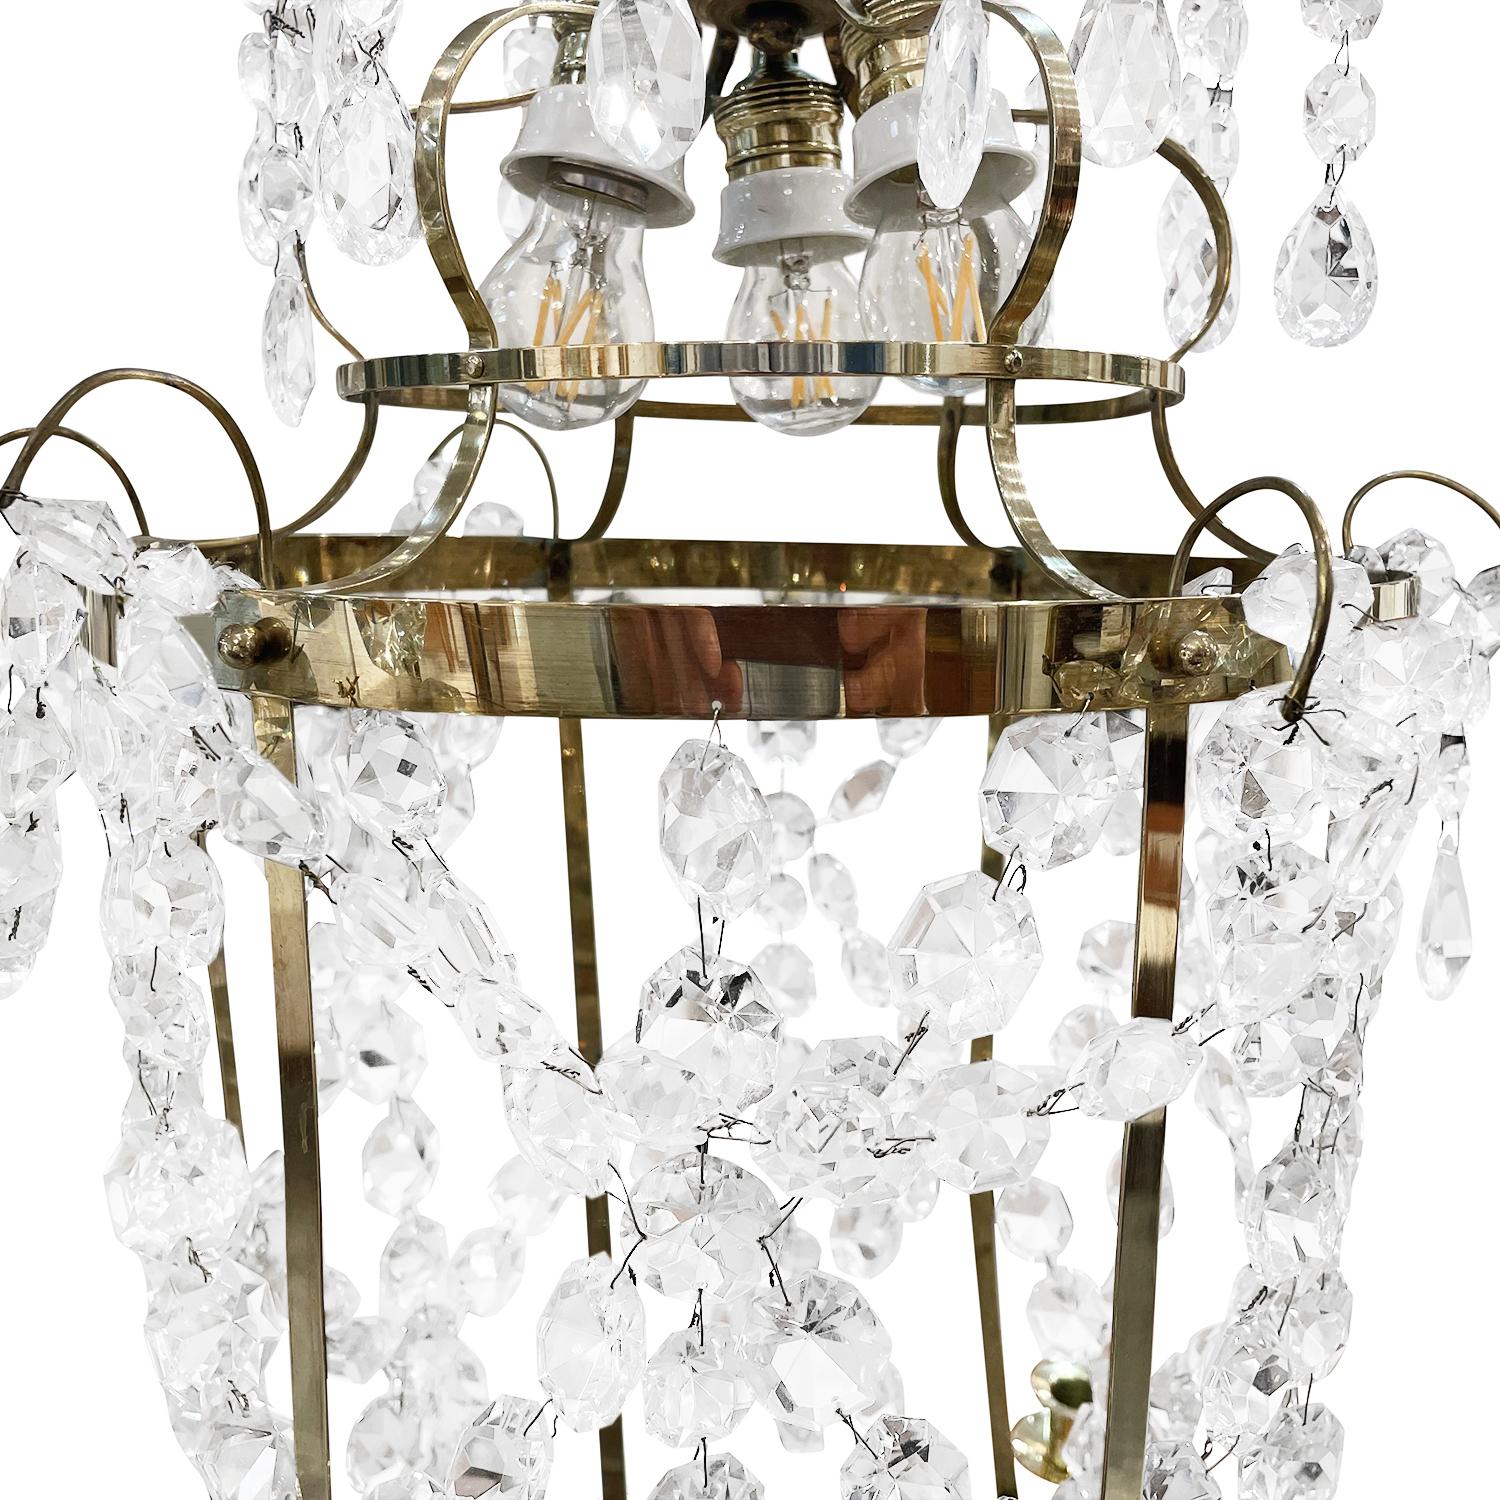 Metal 19th Century French Antique Empire Crystal Glass Chandelier, Parisian Candelabra For Sale